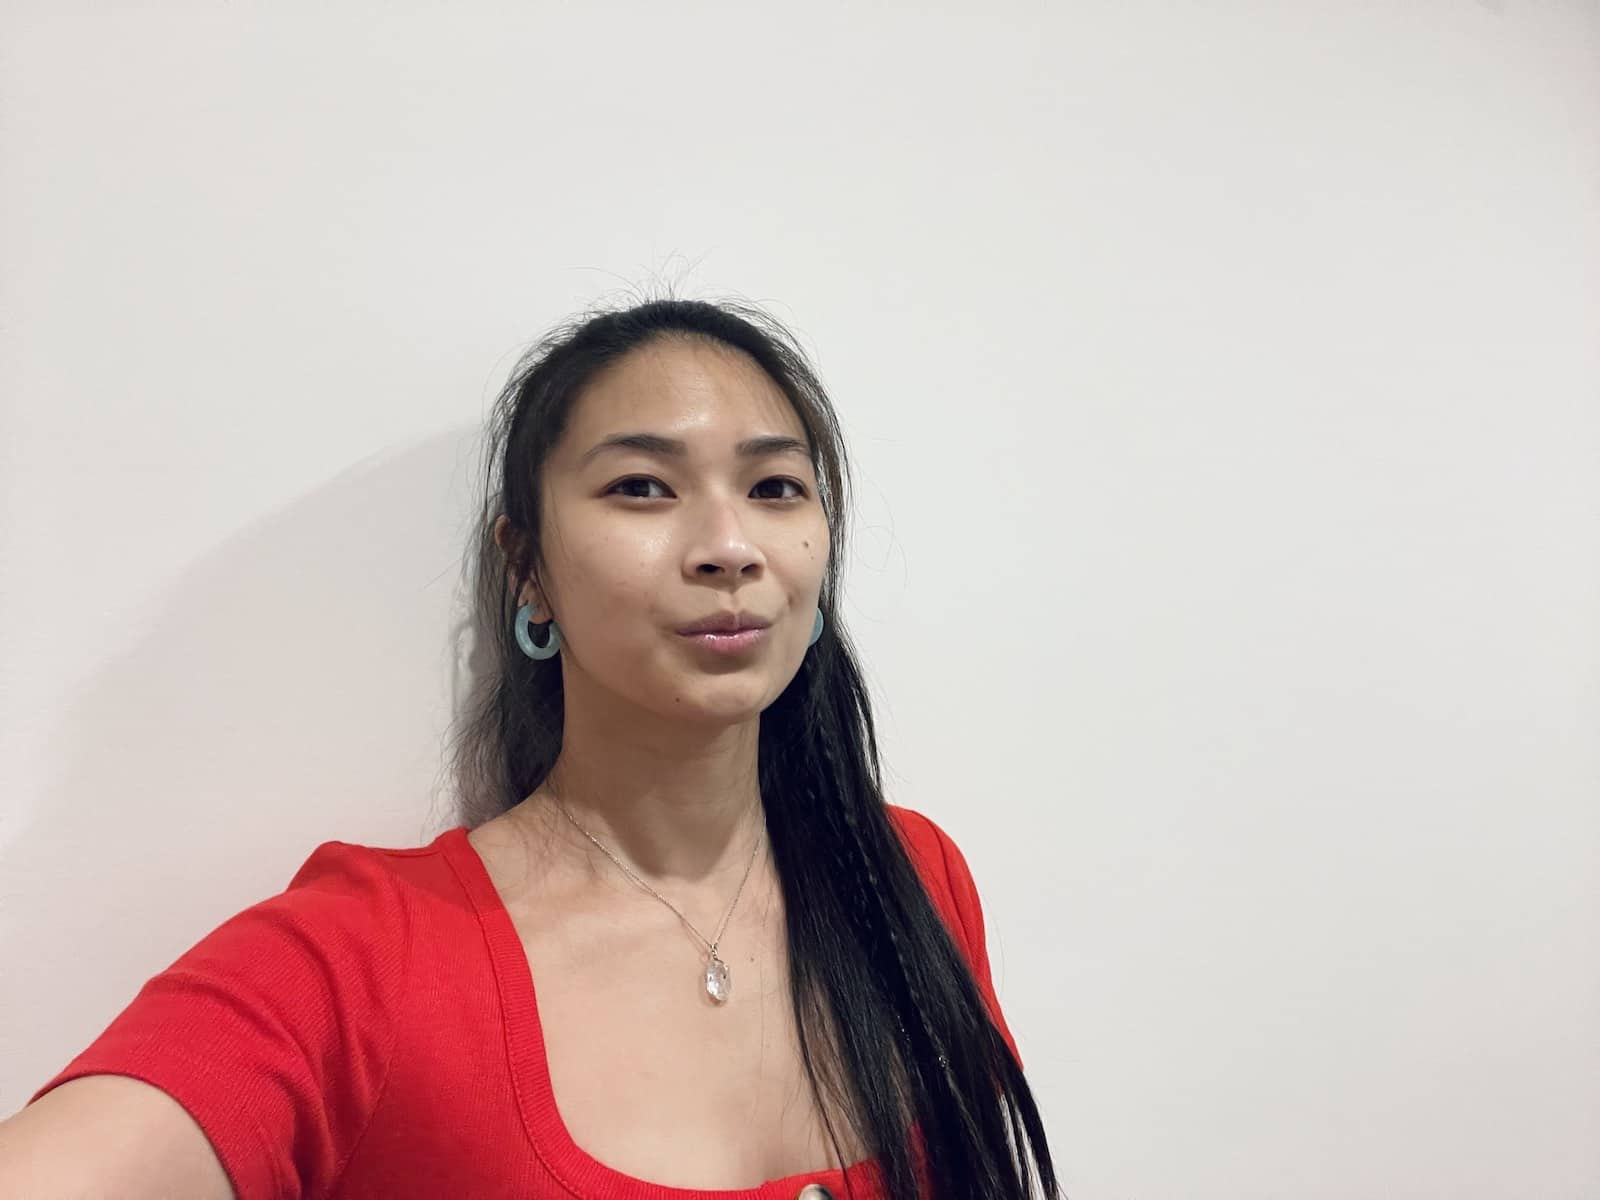 A selfie of an Asian woman with dark hair in a ponytail. She is wearing a red top with a button front. She has light blue resin hoop earrings and is also wearing a necklace with a herkimer diamond on the chain.